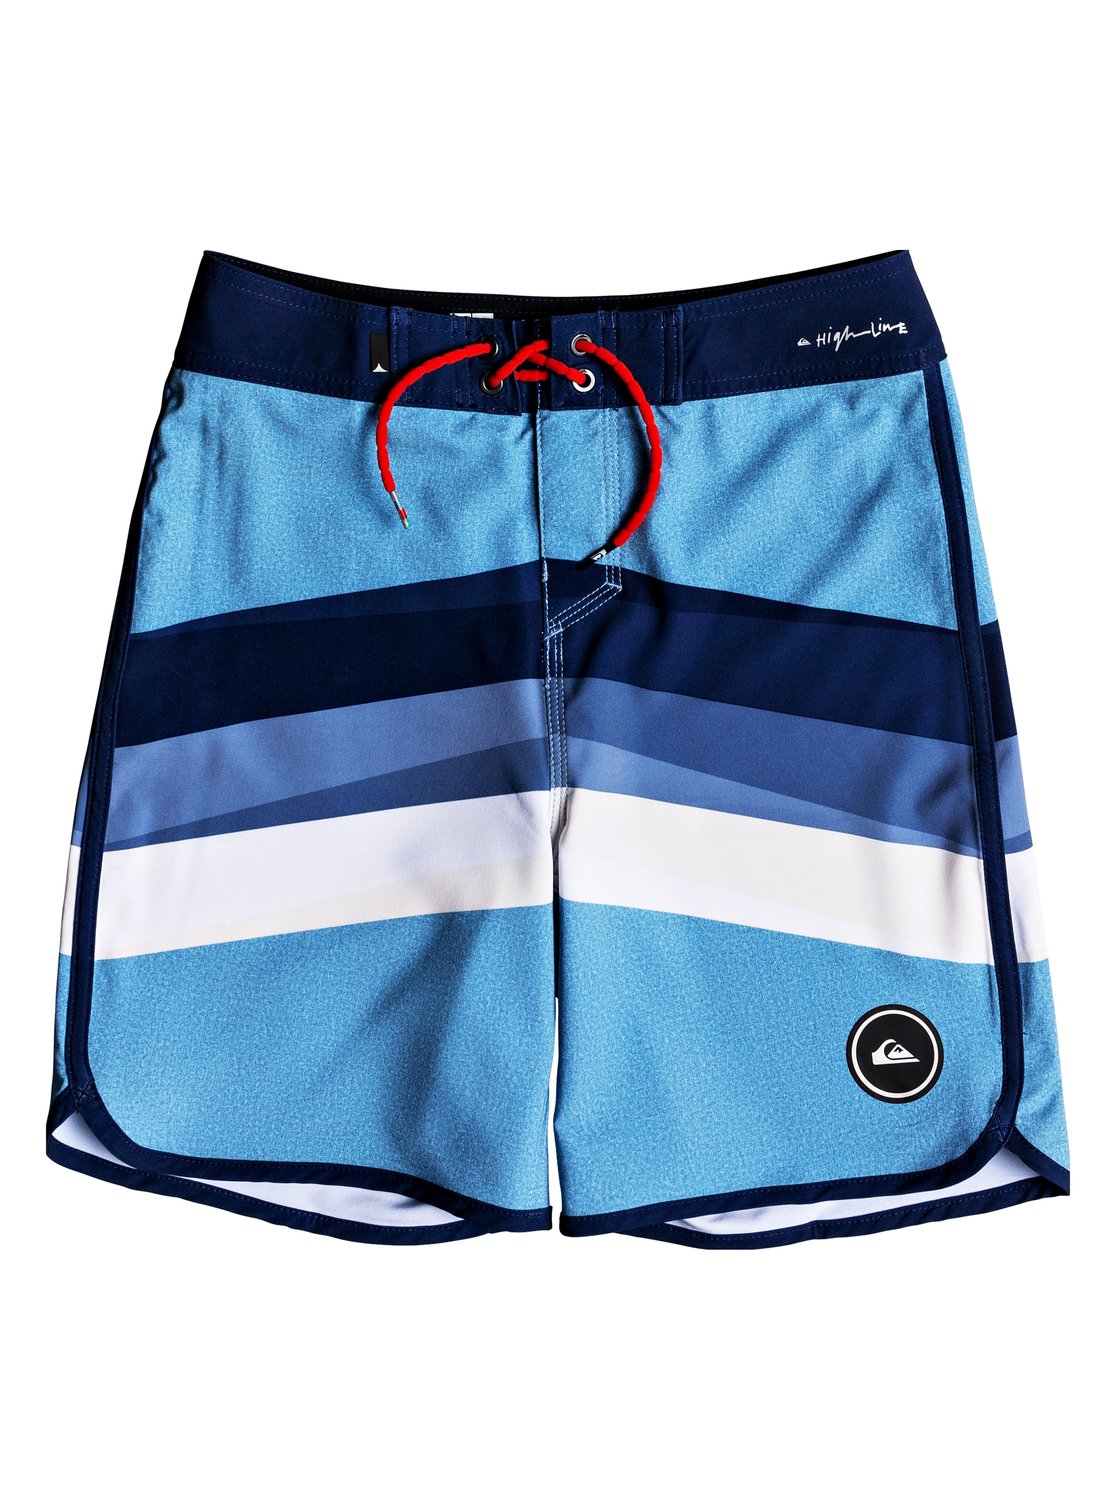 Quiksilver Highline Reverse Youth Boardshort BNG6 22/8S